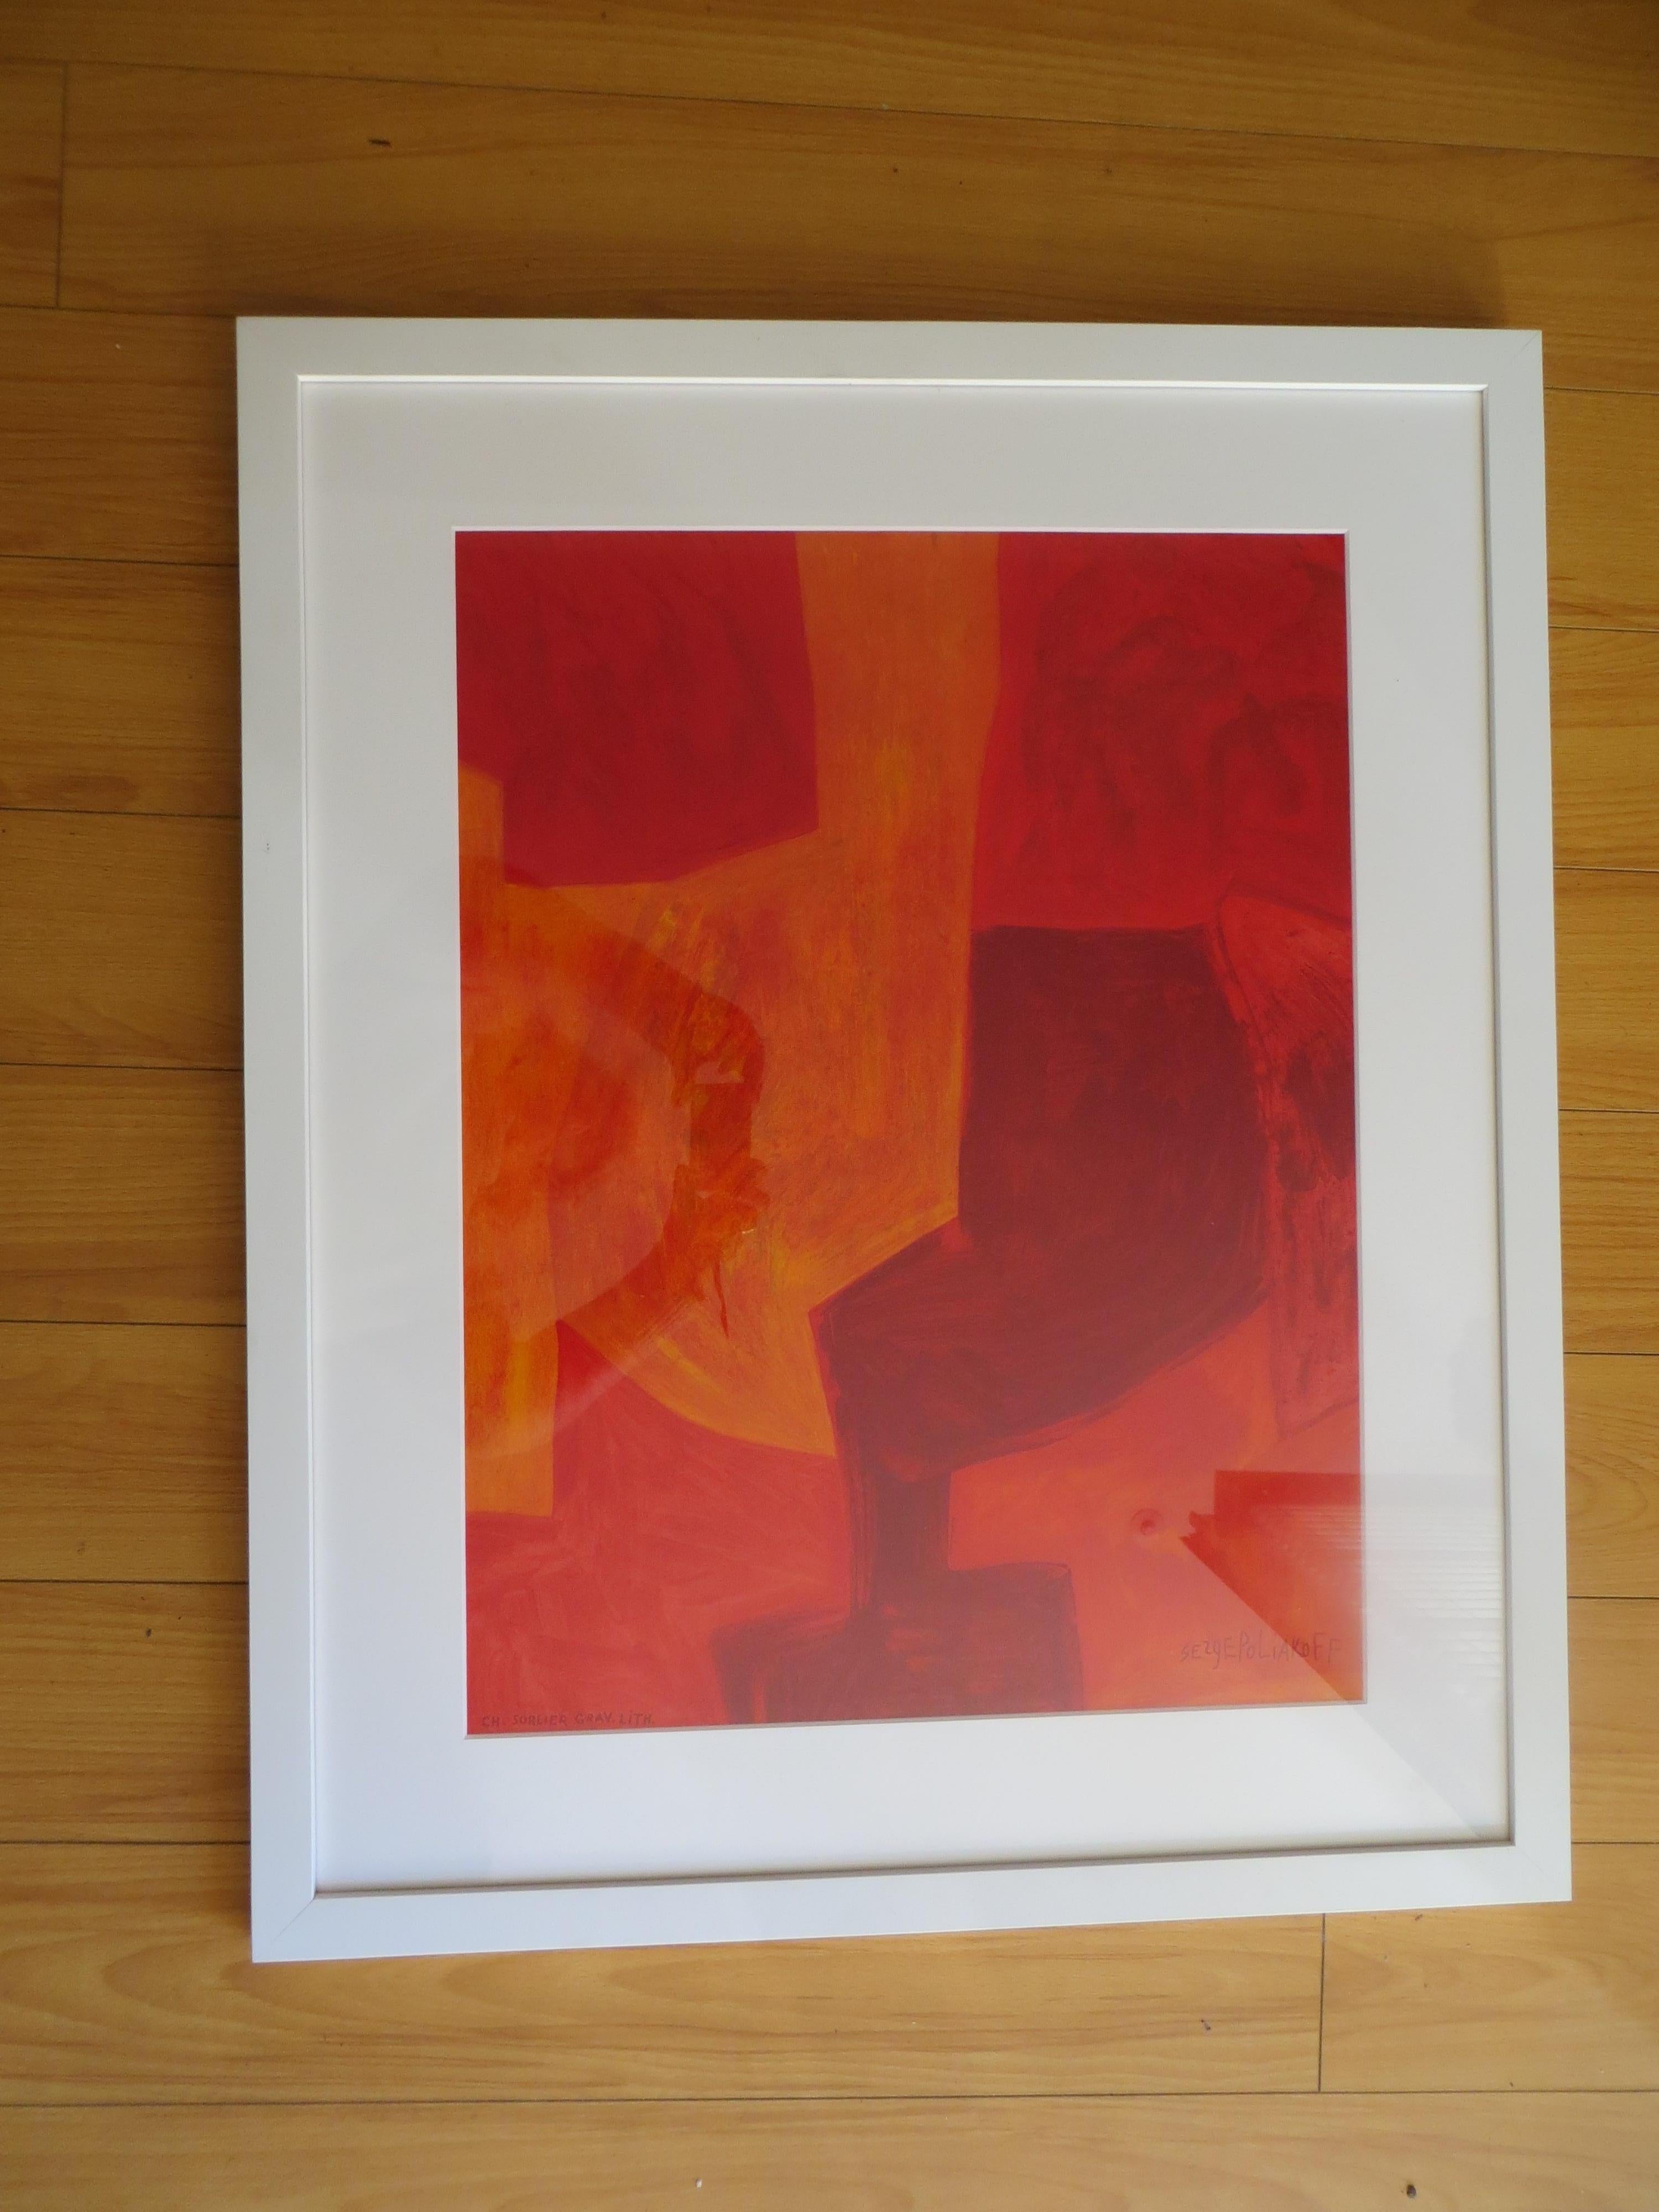 Serge POLIAKOFF - Composition gouache 1969
Edition lithograph in colours on Arches paper after the gouache artwork from 1969.
Signed in the plate at the lower right.
Published at the occasion of travelling expositions by Serge Poliakoff in 1975.
The